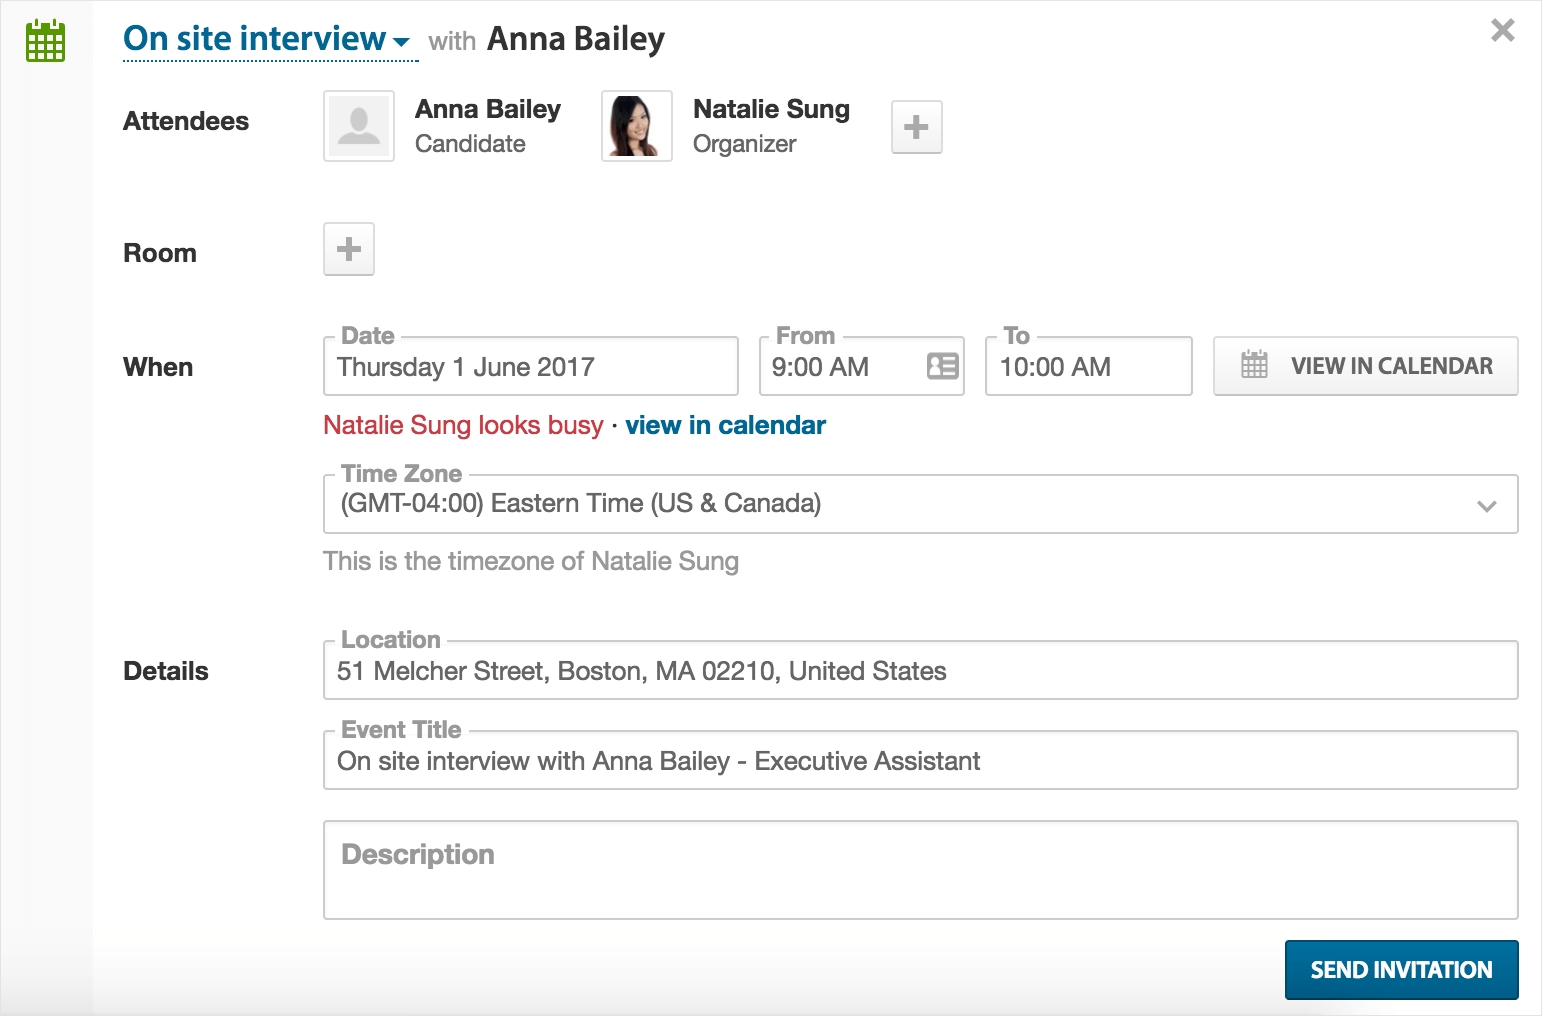 How To Schedule Job Interviews Efficiently: A Guide For